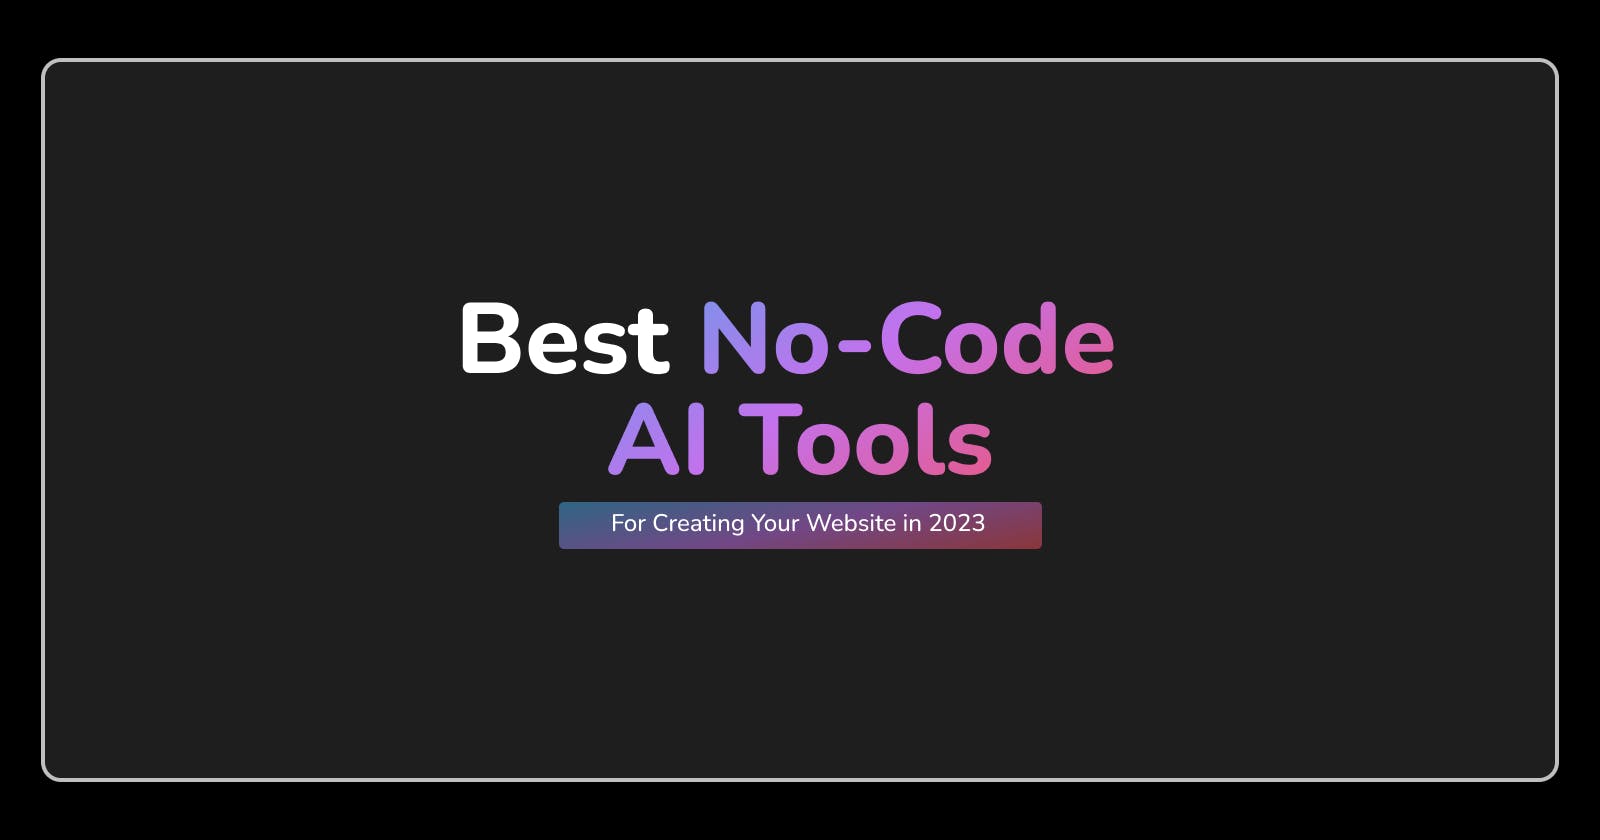 Best No-Code AI Tools for Creating Your Website in 2023